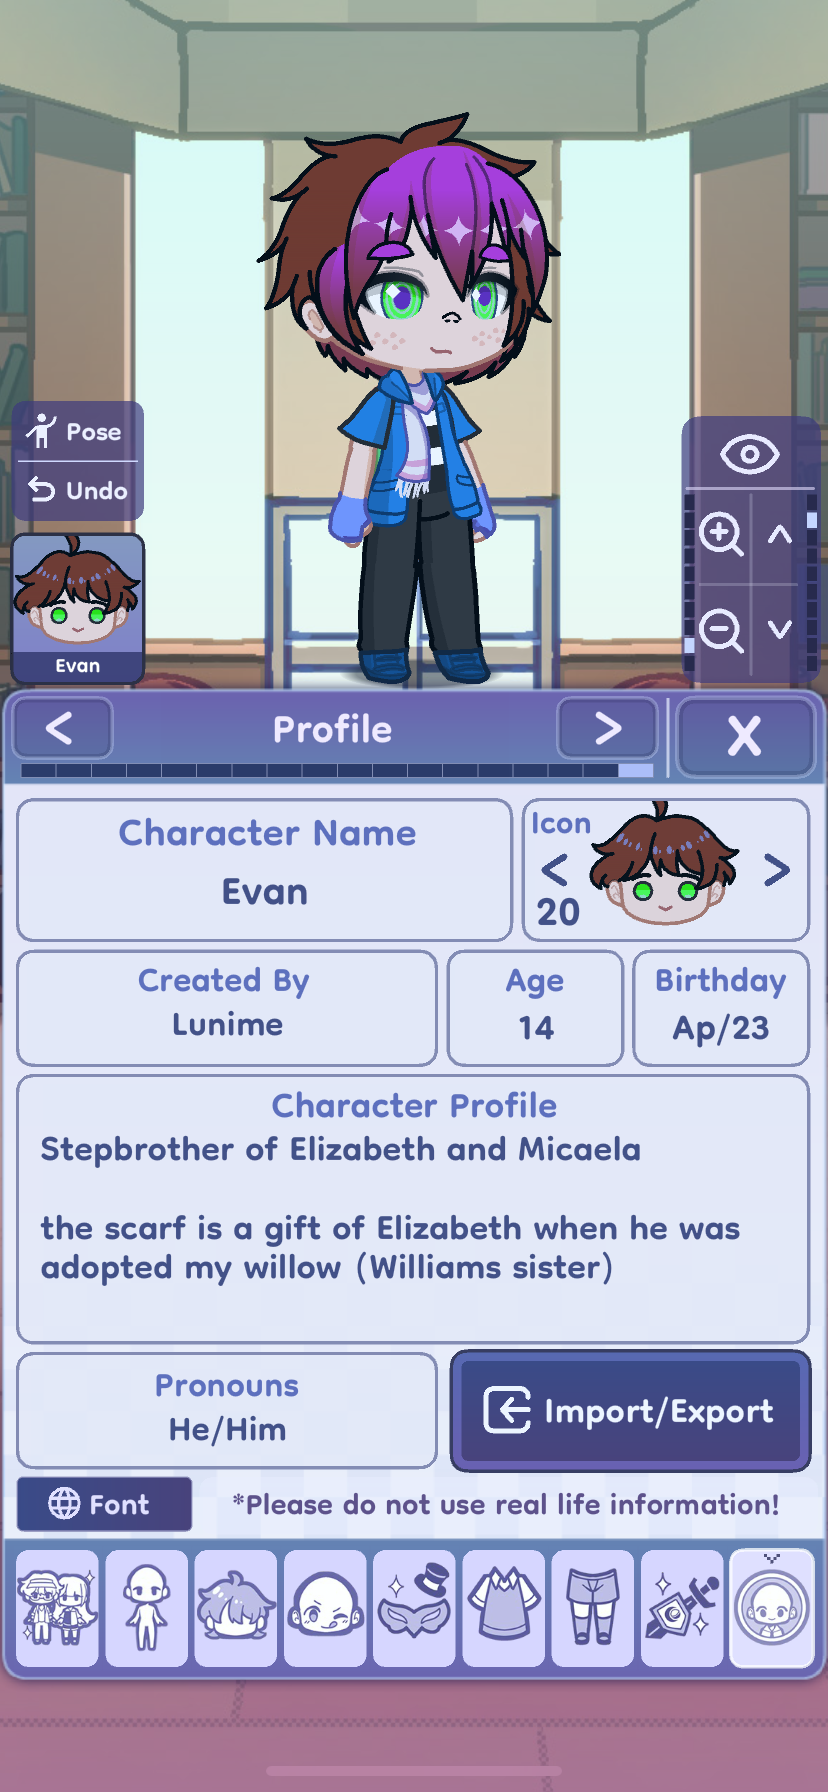 Evan from my new au